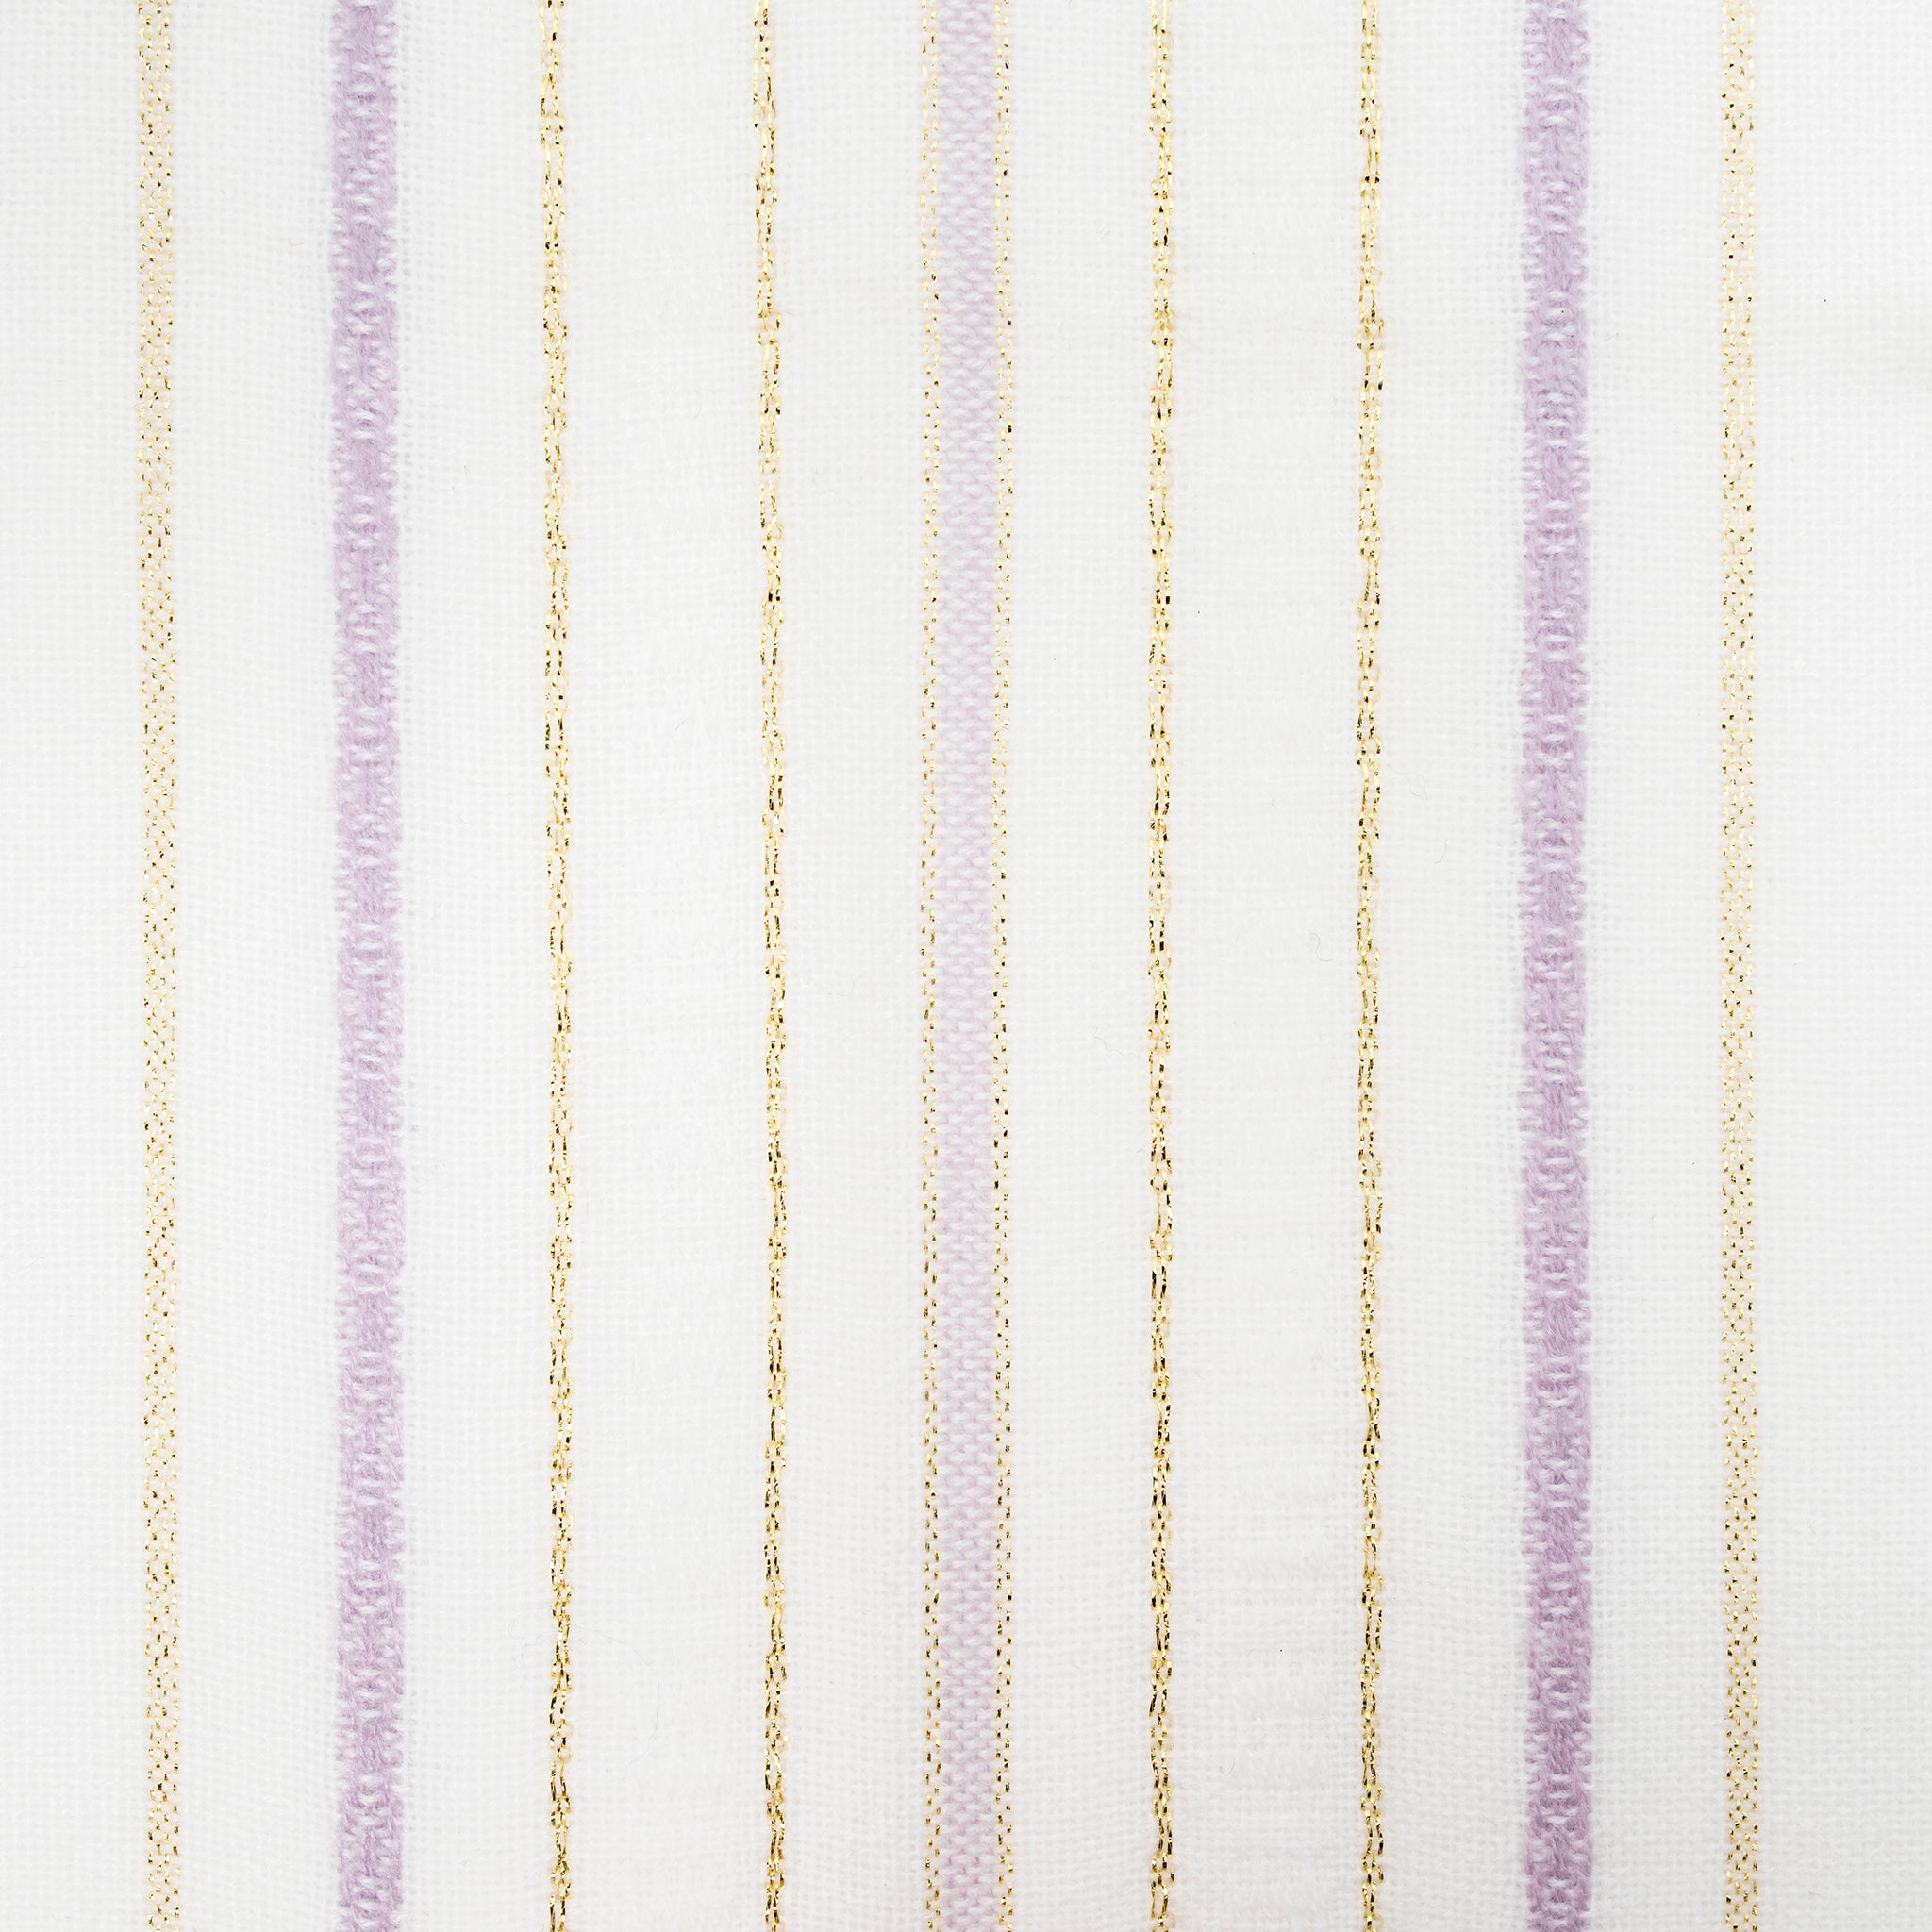 Tablecloths - Classic Design - Lilach Purple with Gold on White